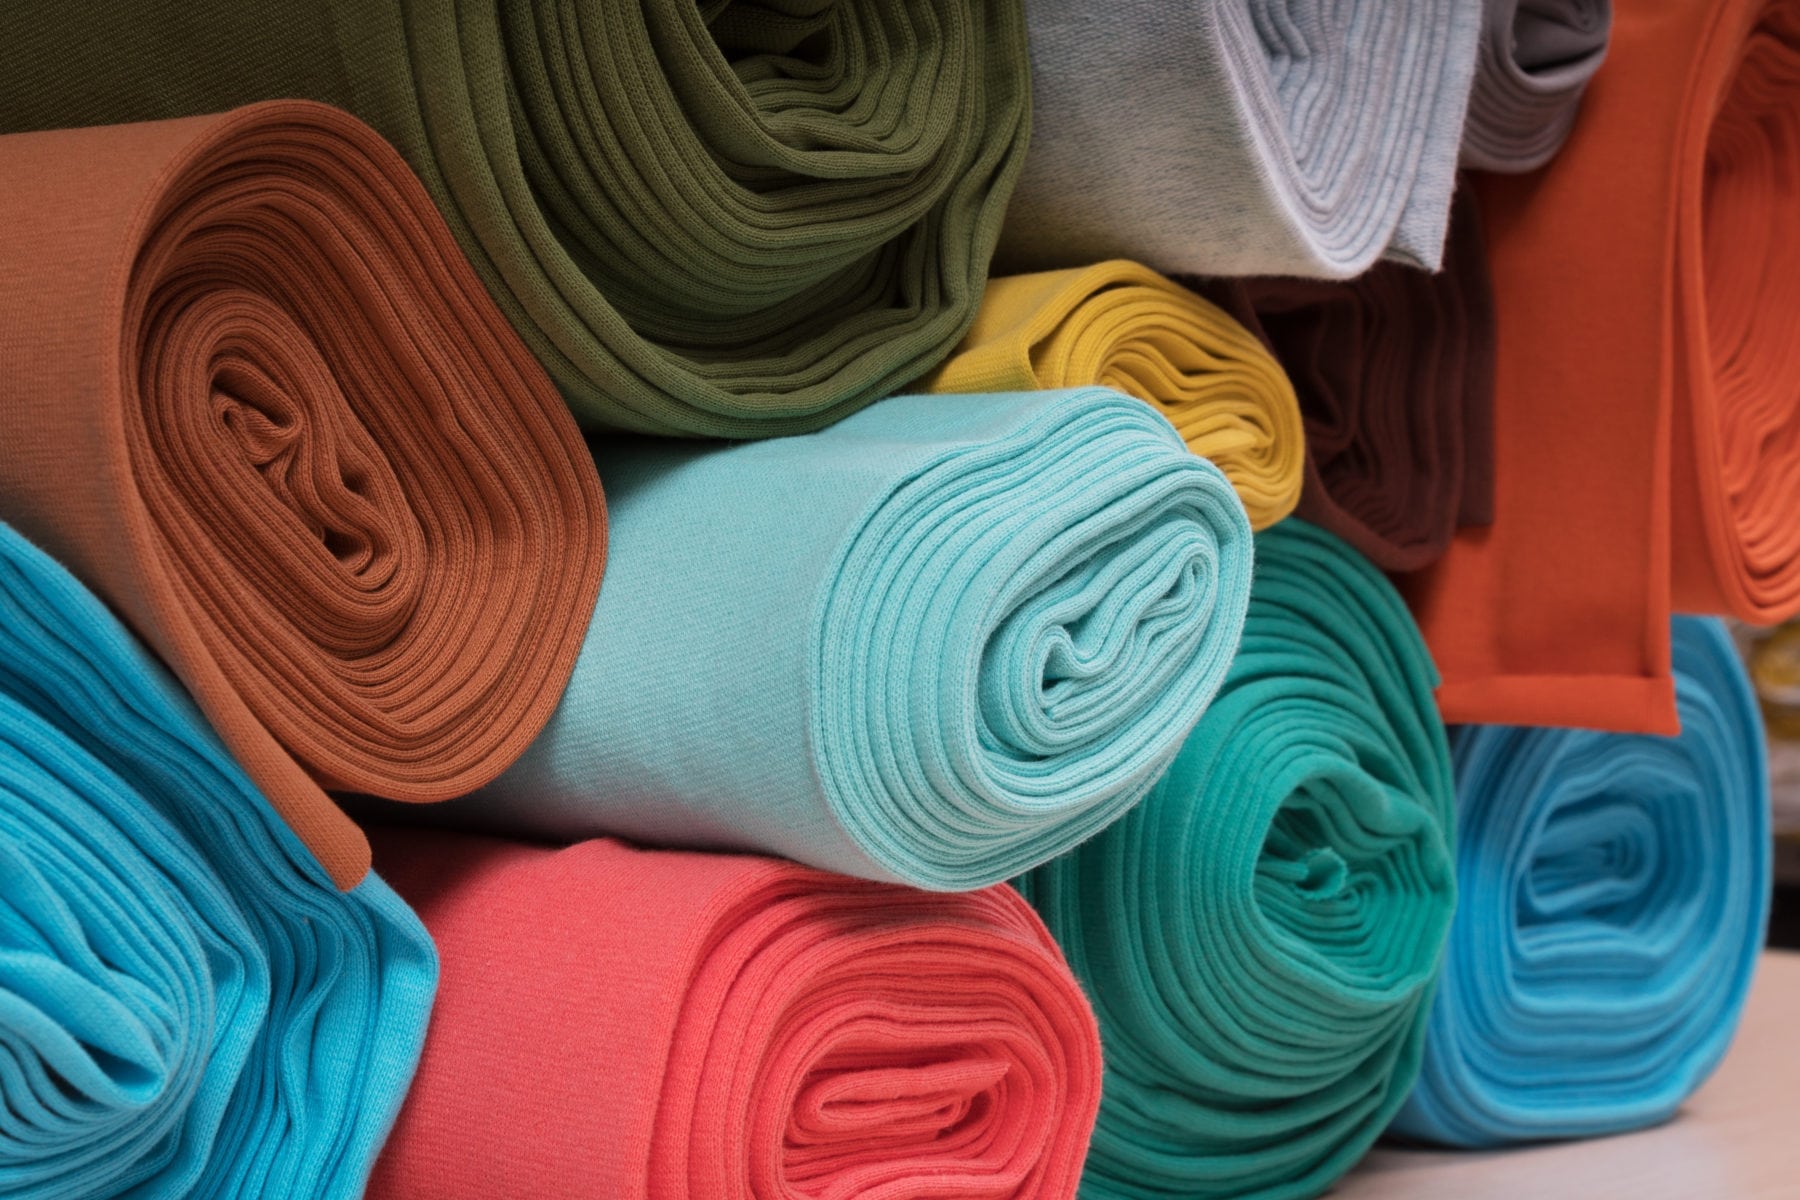 Fabric Stock Services A rising trend but not a replacement